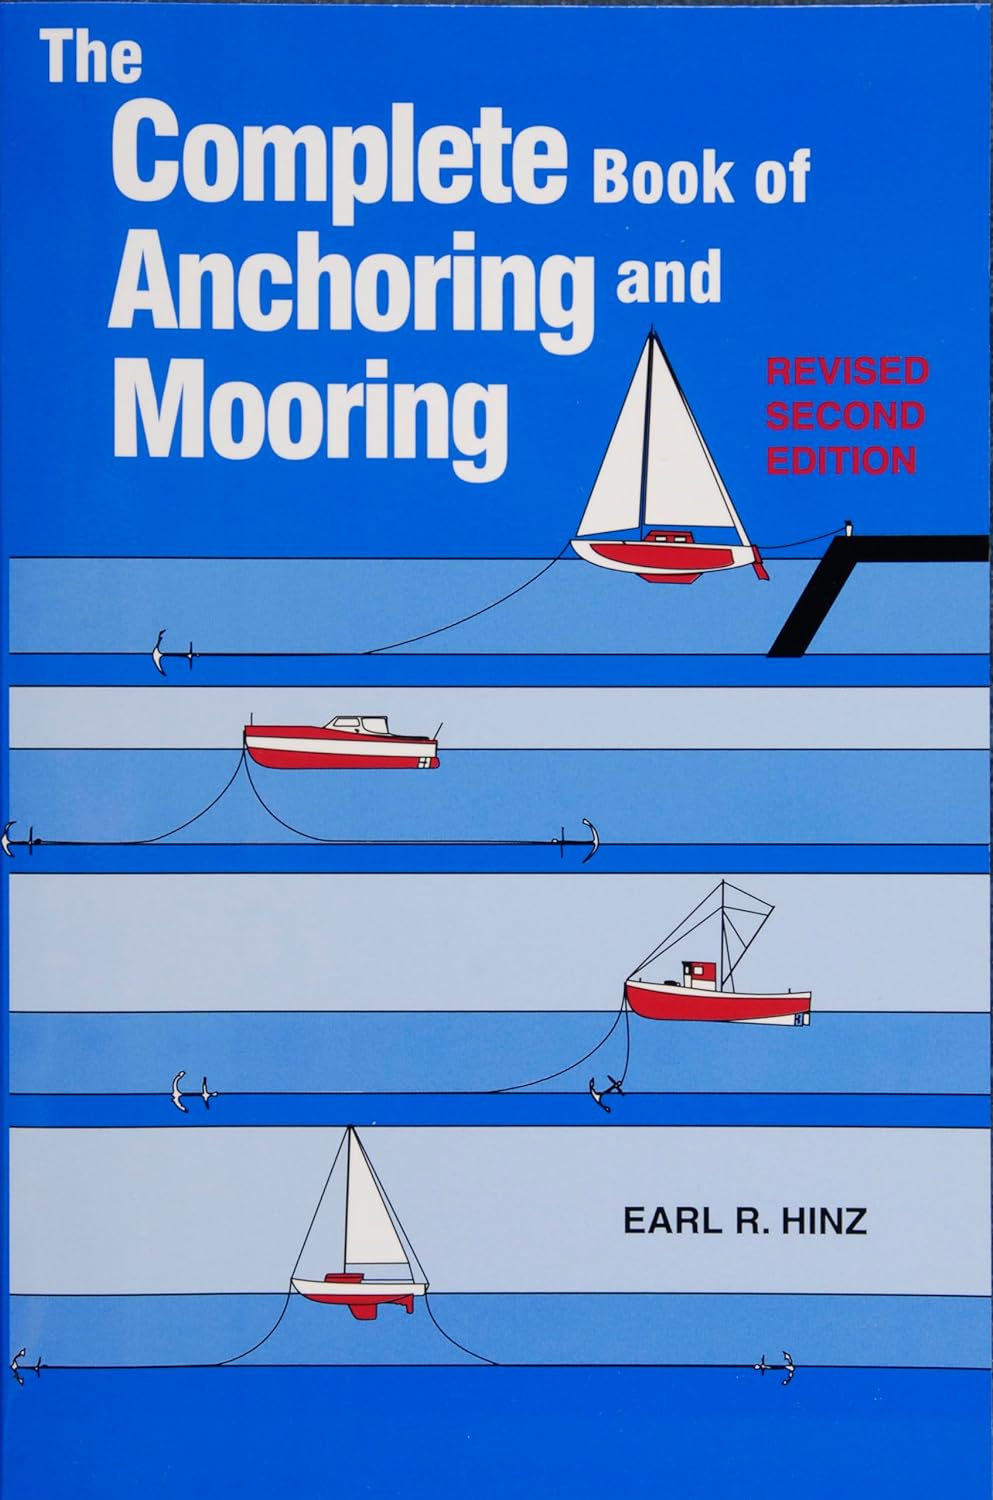 The Complete Book of Anchoring and Mooring, Revised 2nd Edition